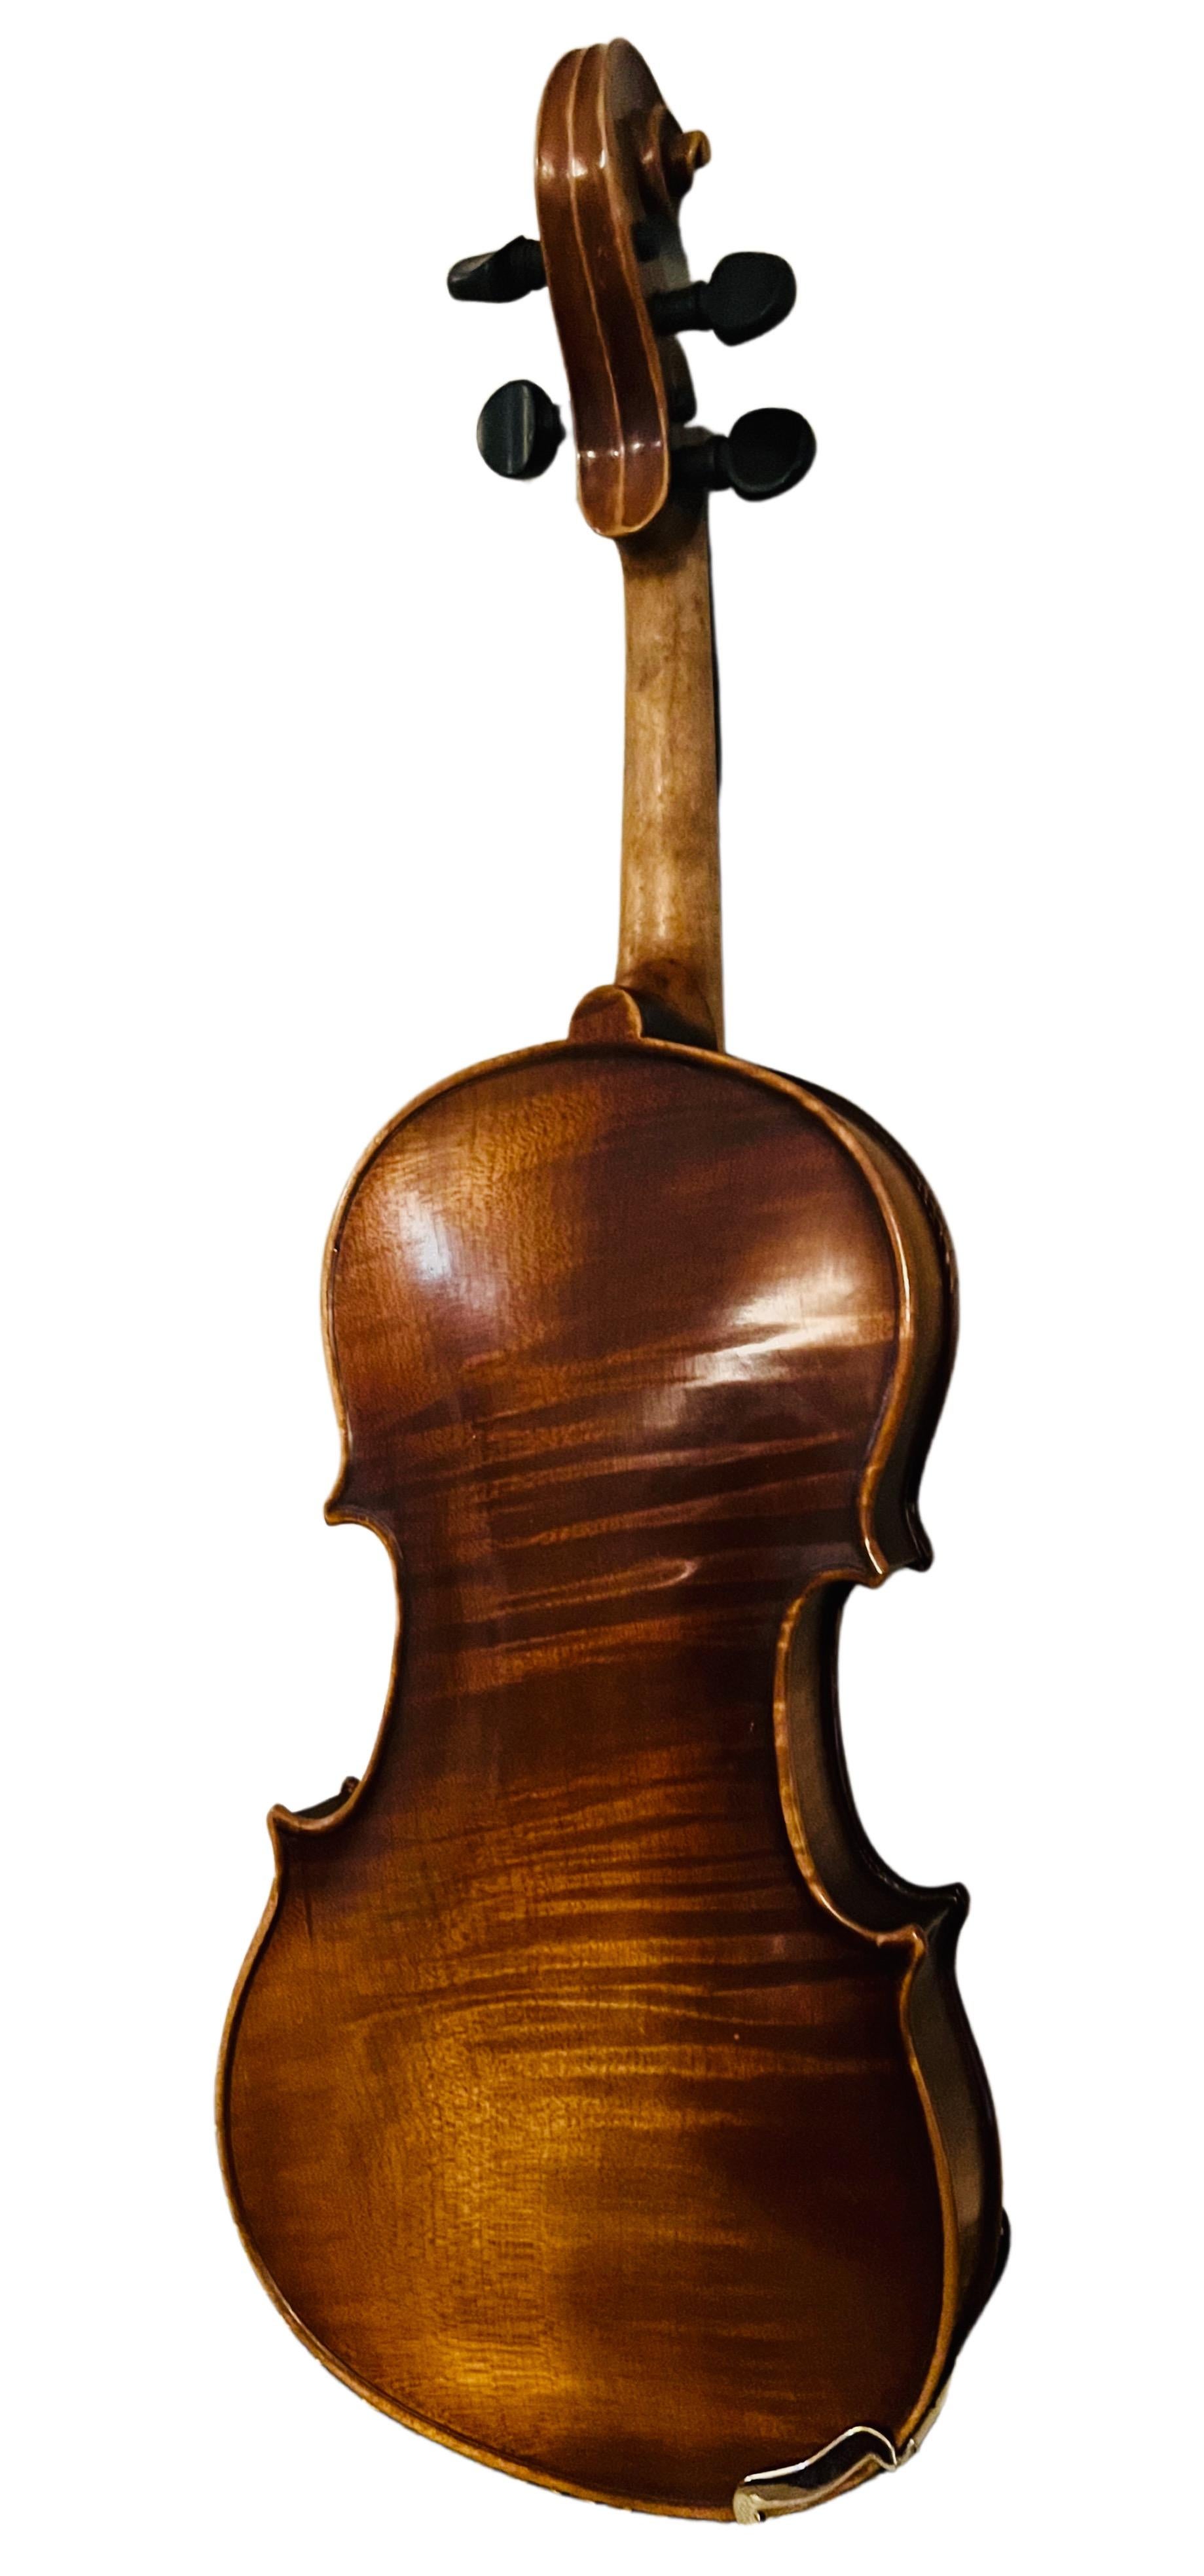 1970 3/4 E.R. Pfretzschner Hand-Crafted Violin in the Style of A. Stradivarius For Sale 1